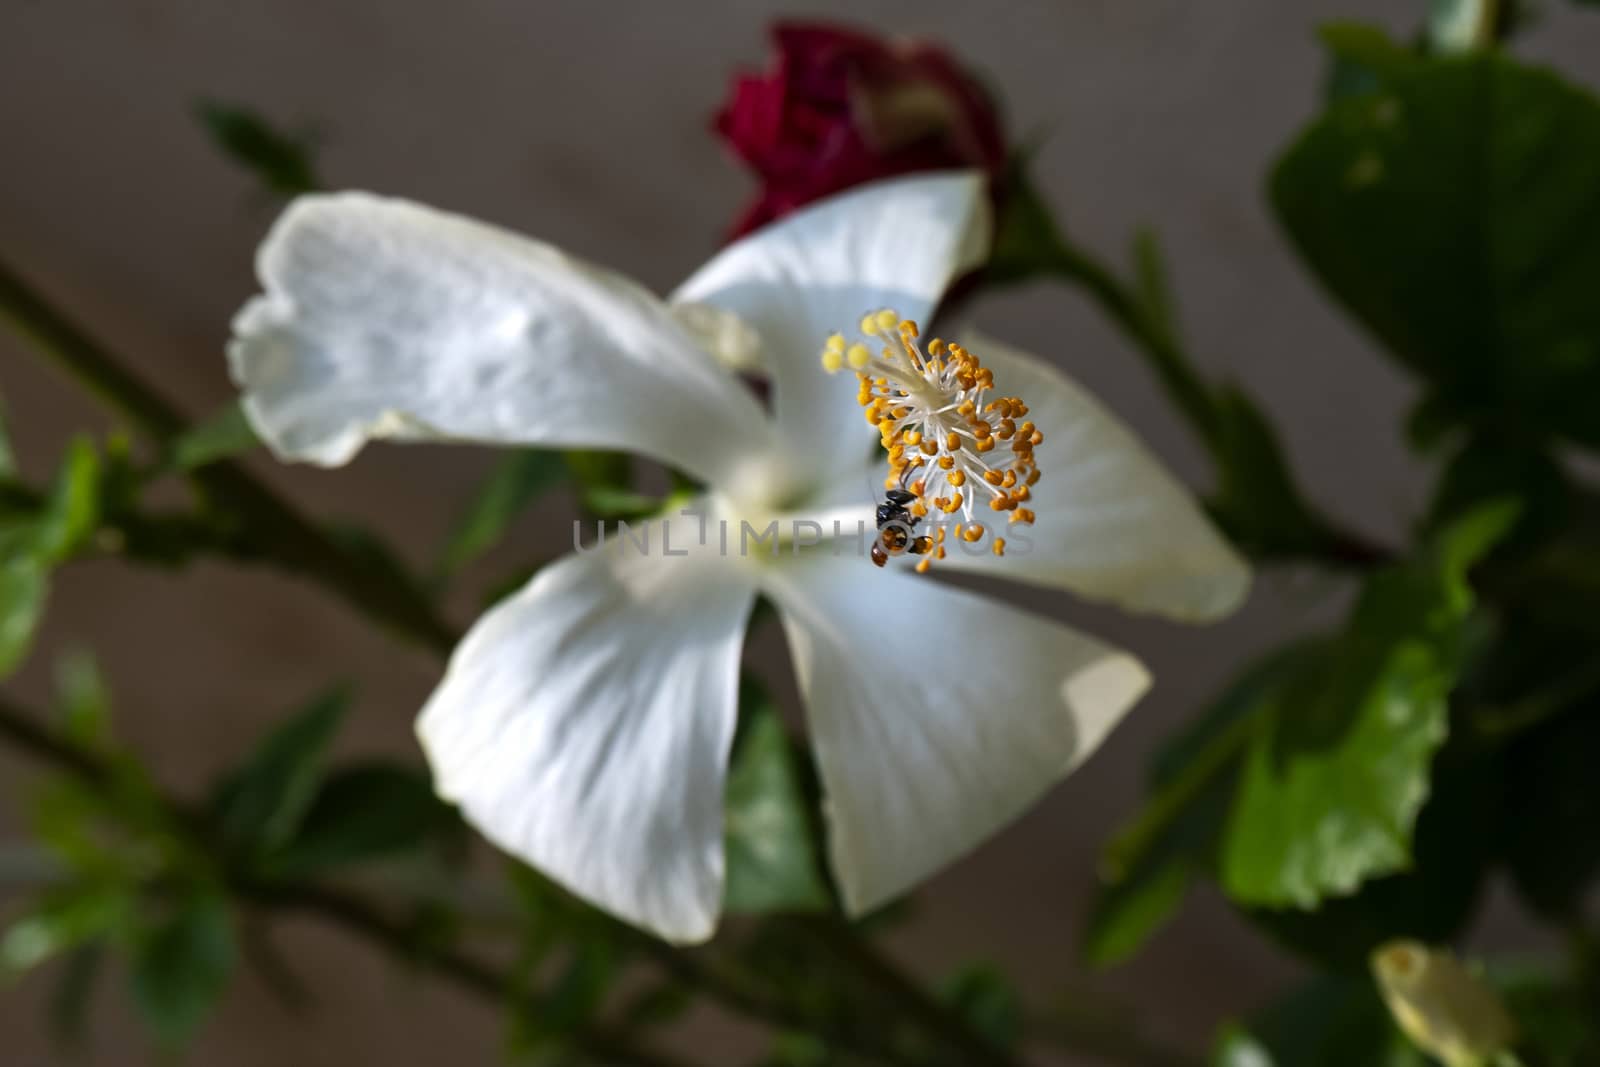 close up view of white hibiscus flower & honey bee in garden background flower & leaves blurred